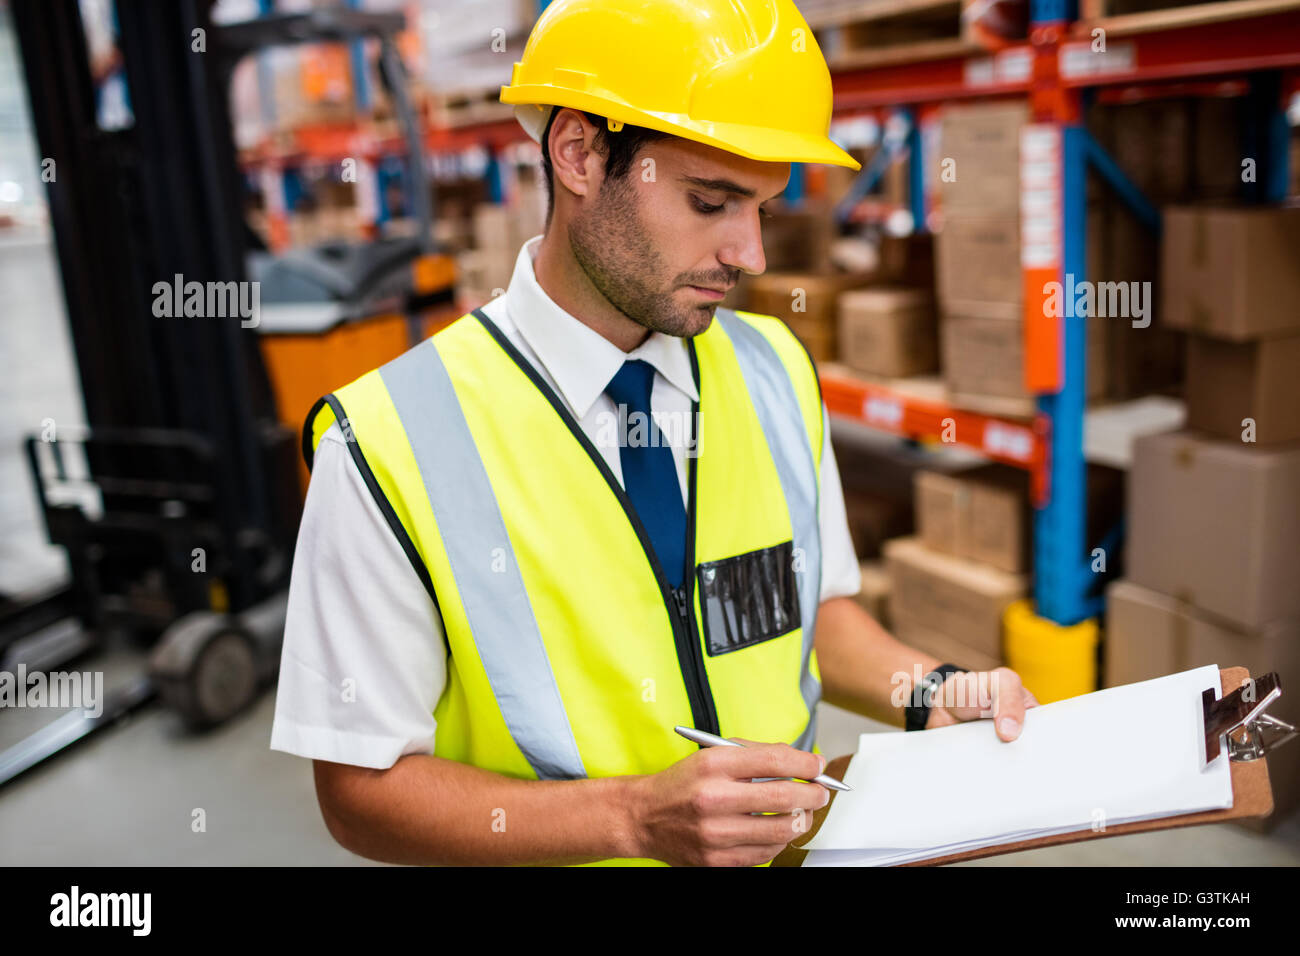 Warehouse manager checking list on his clipboard Stock Photo